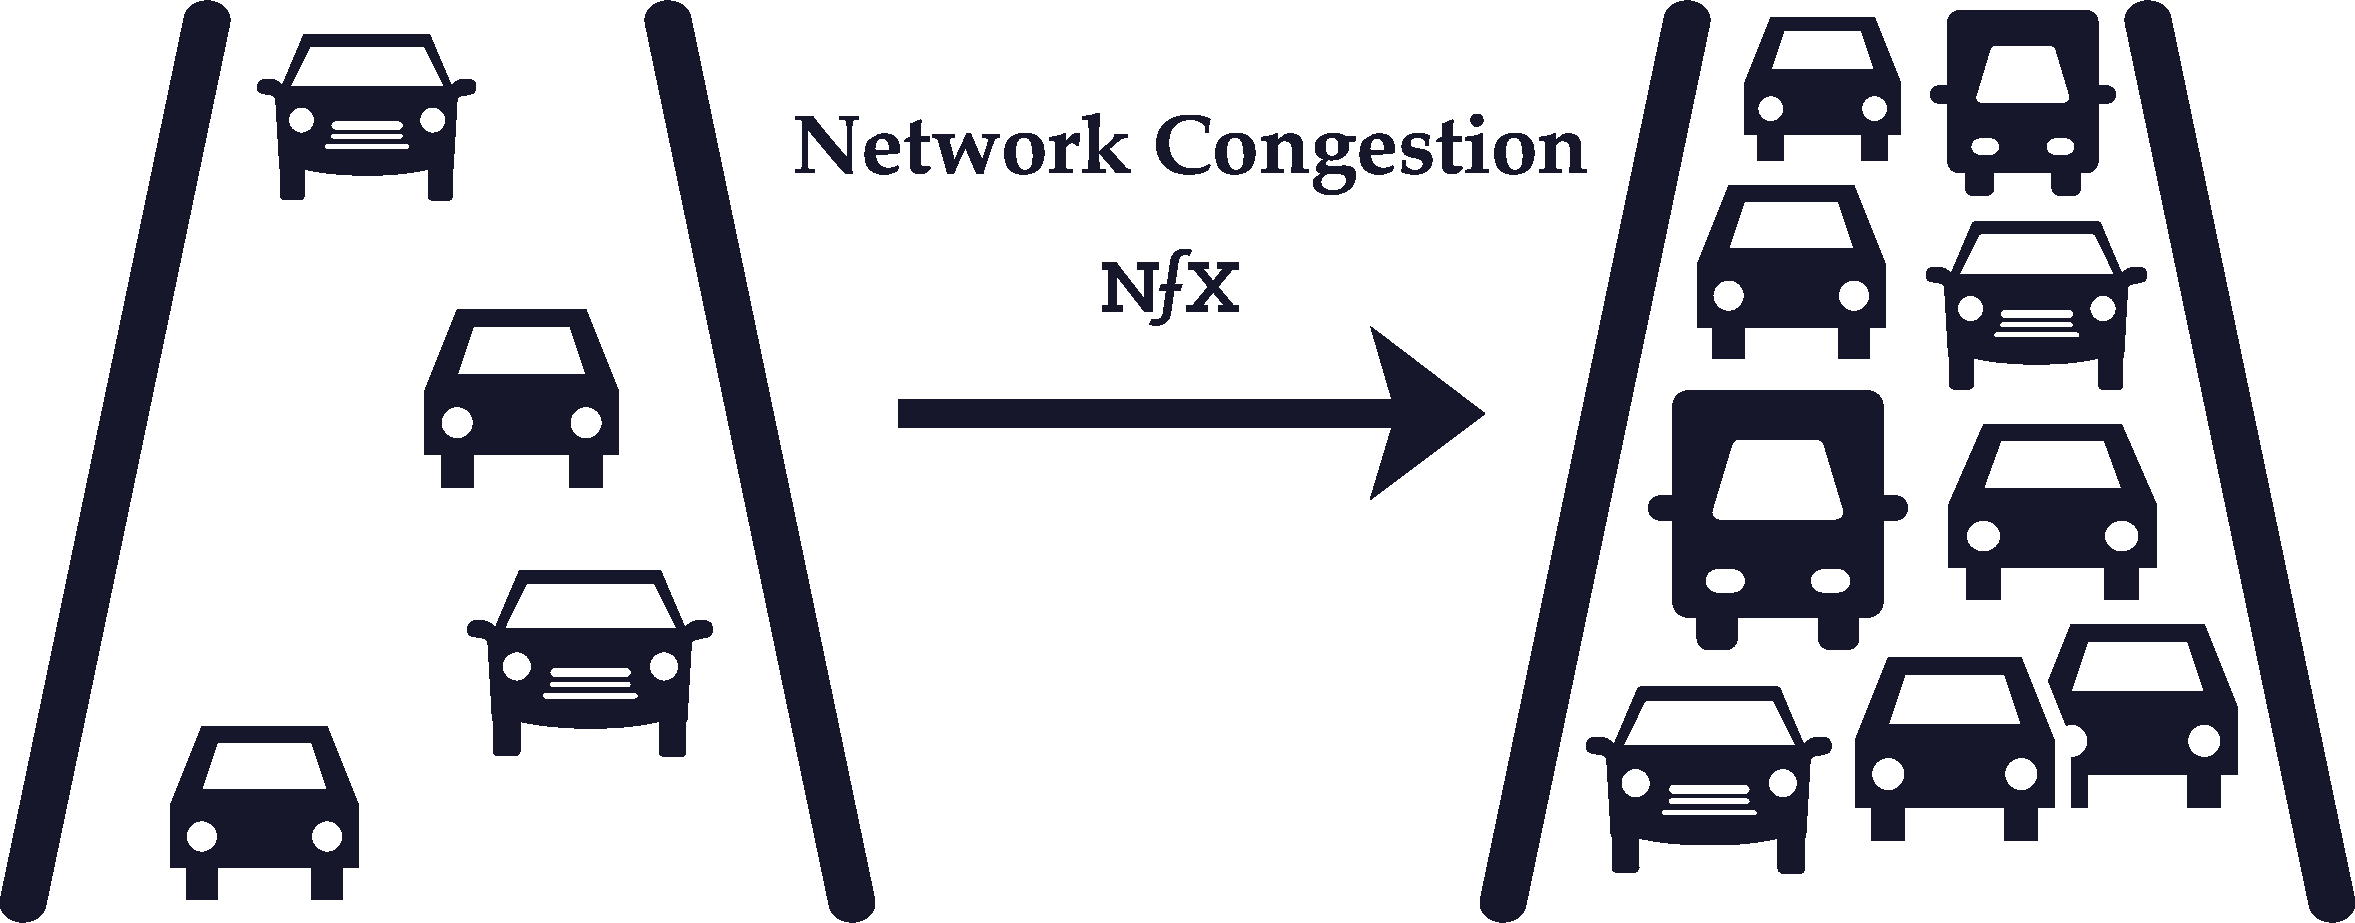 Network congestion